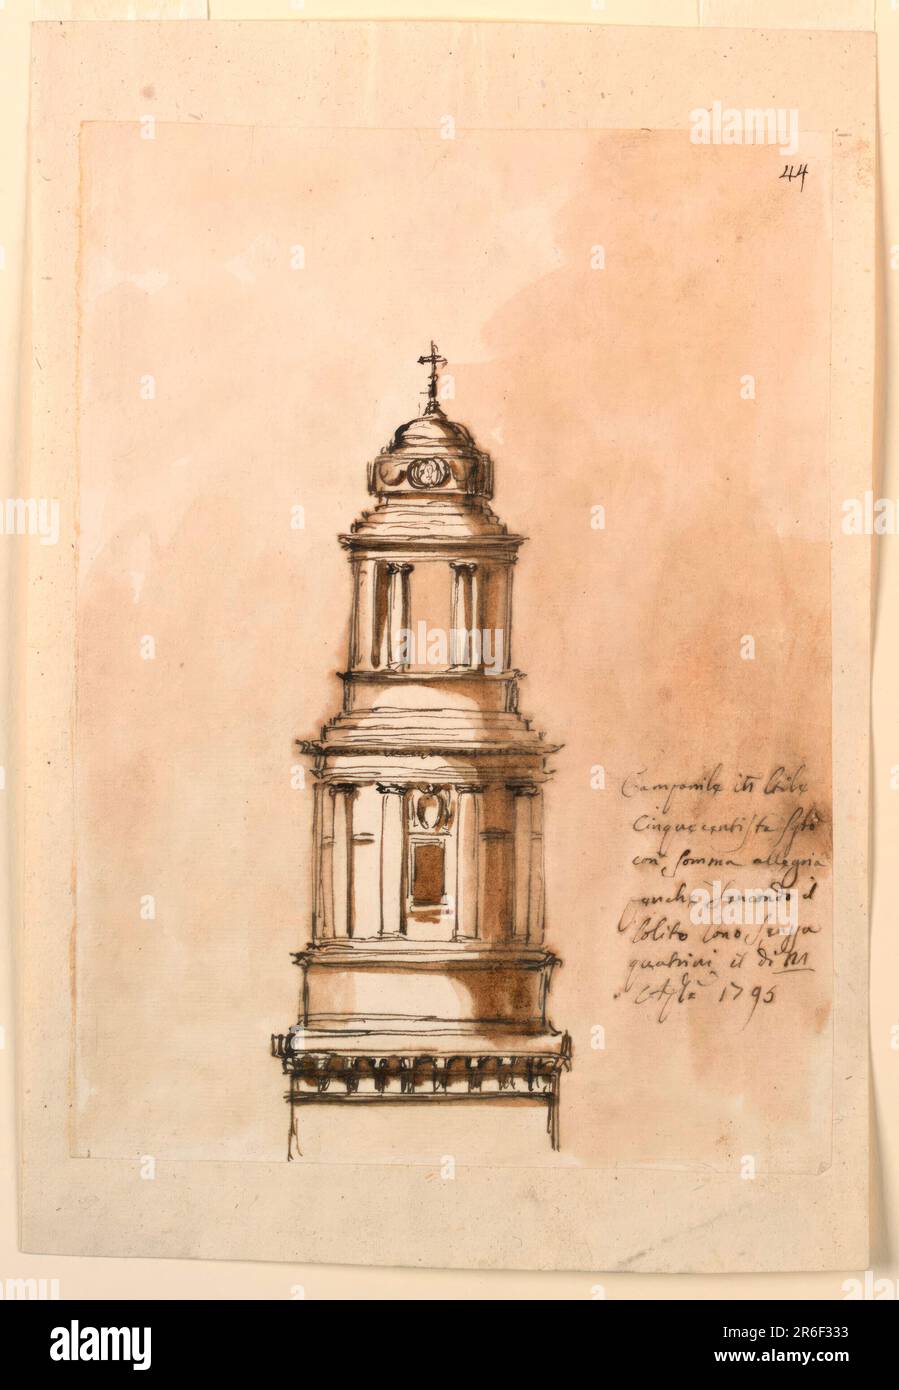 Design for a steeple. Below is the entablature of a square part. Above rises a story like a circular pavilion upon a dado with embedded columns supporting the entablature. At the front are a window and an escutcheon above it. The upper story is shaped like a similar open pavilion. On top is a dome of a kind, with a band aroudn the tambour, and a cross colored background. Date: 1795. Pen and brown ink, brush and brown wash on lined off-white laid paper. Museum: Cooper Hewitt, Smithsonian Design Museum. Stock Photo